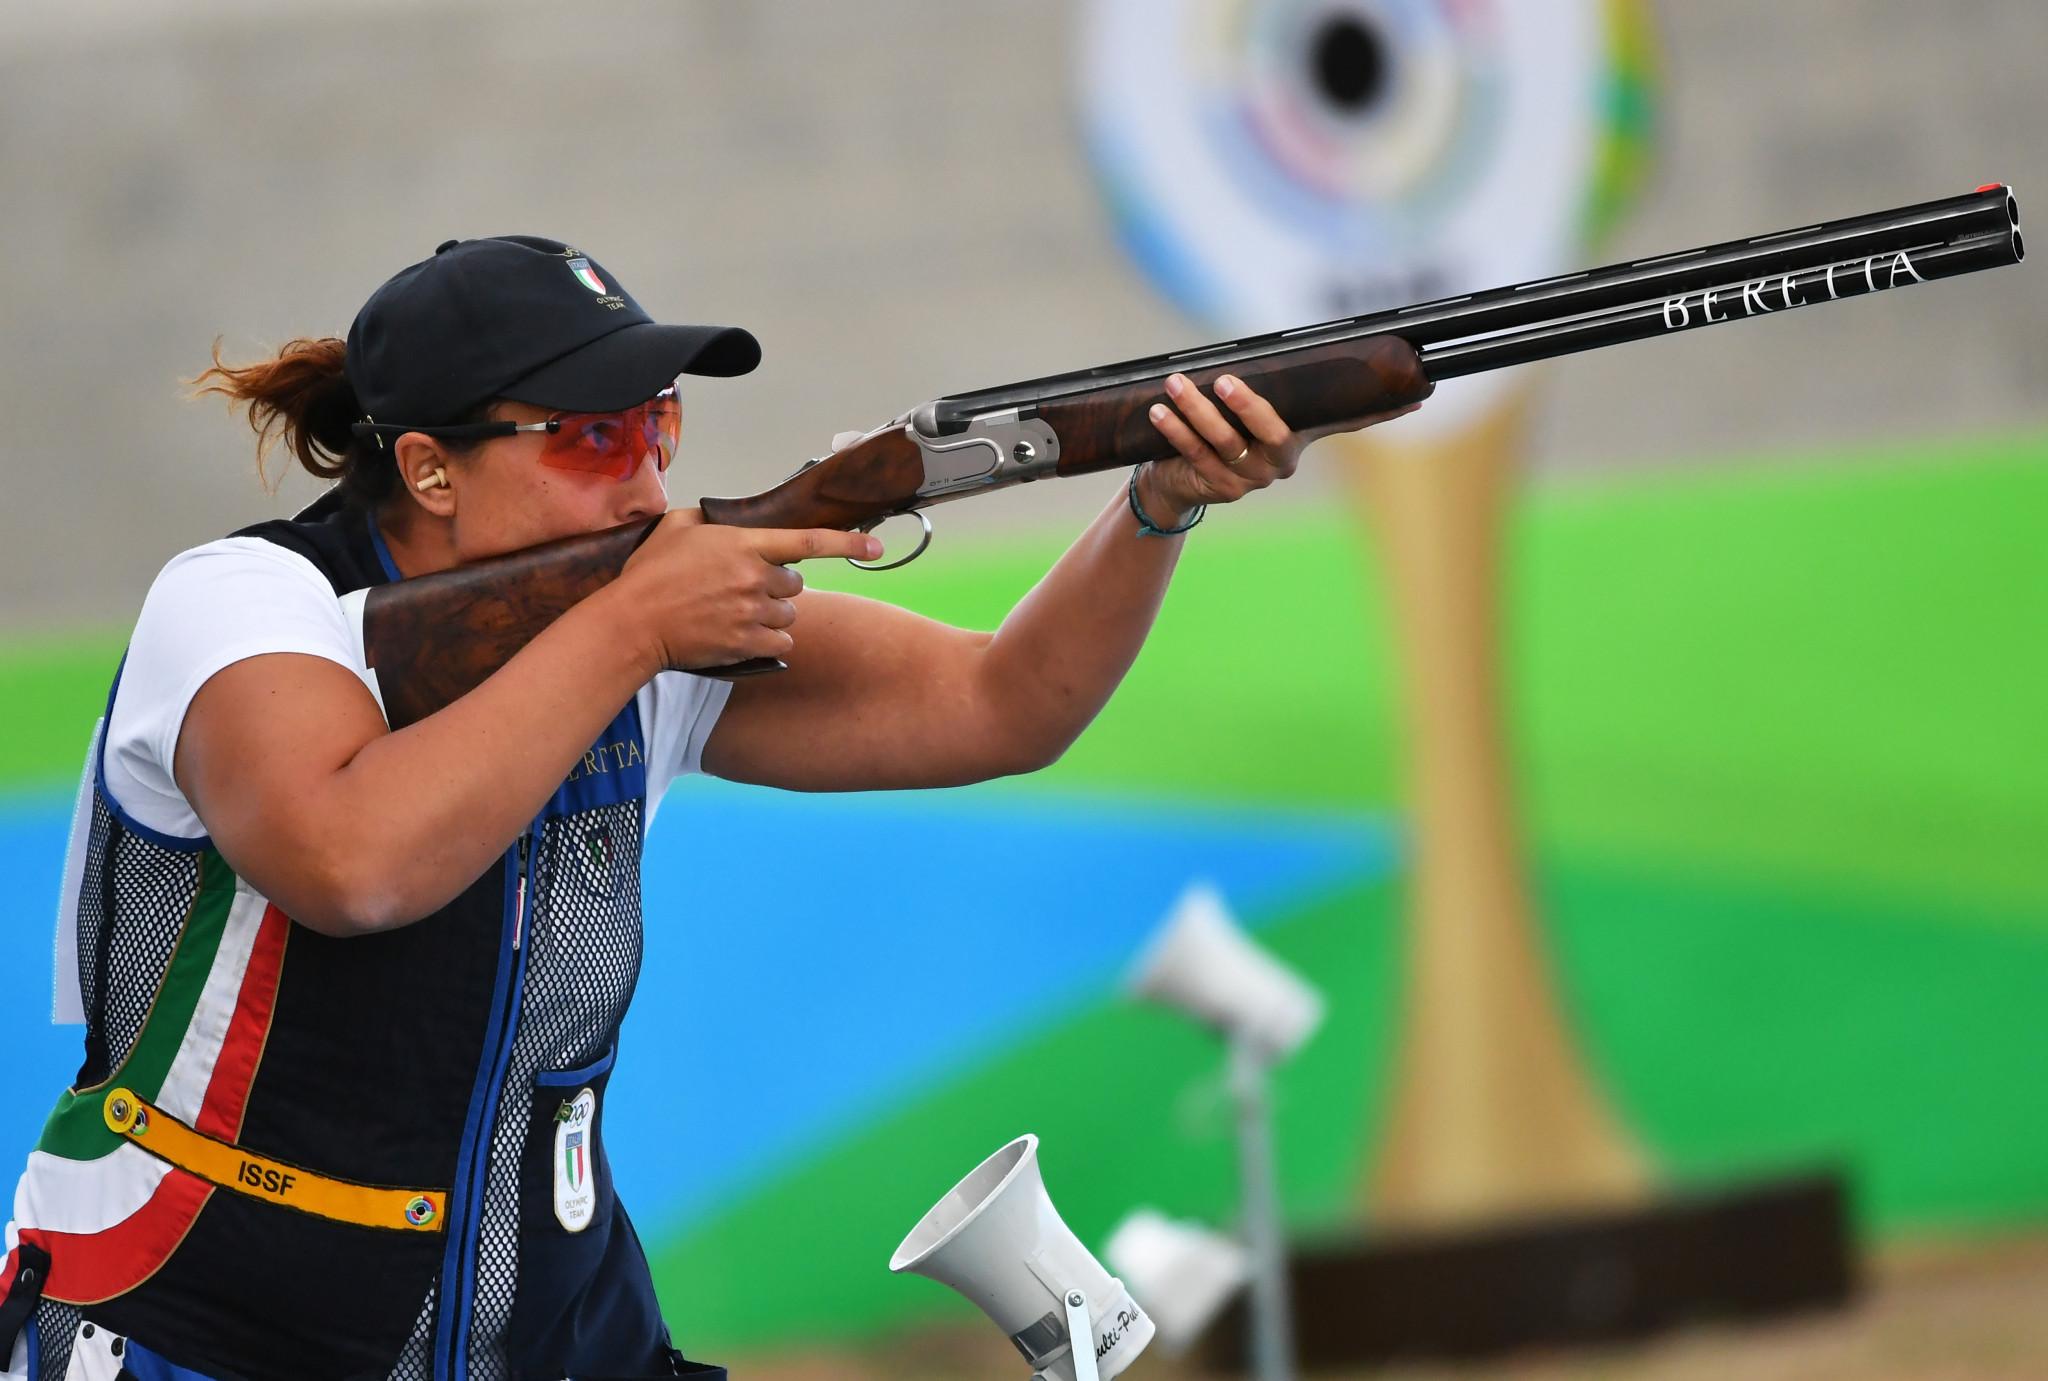 Olympic champions combine to win mixed skeet gold for Italy at ISSF World Shotgun Championship